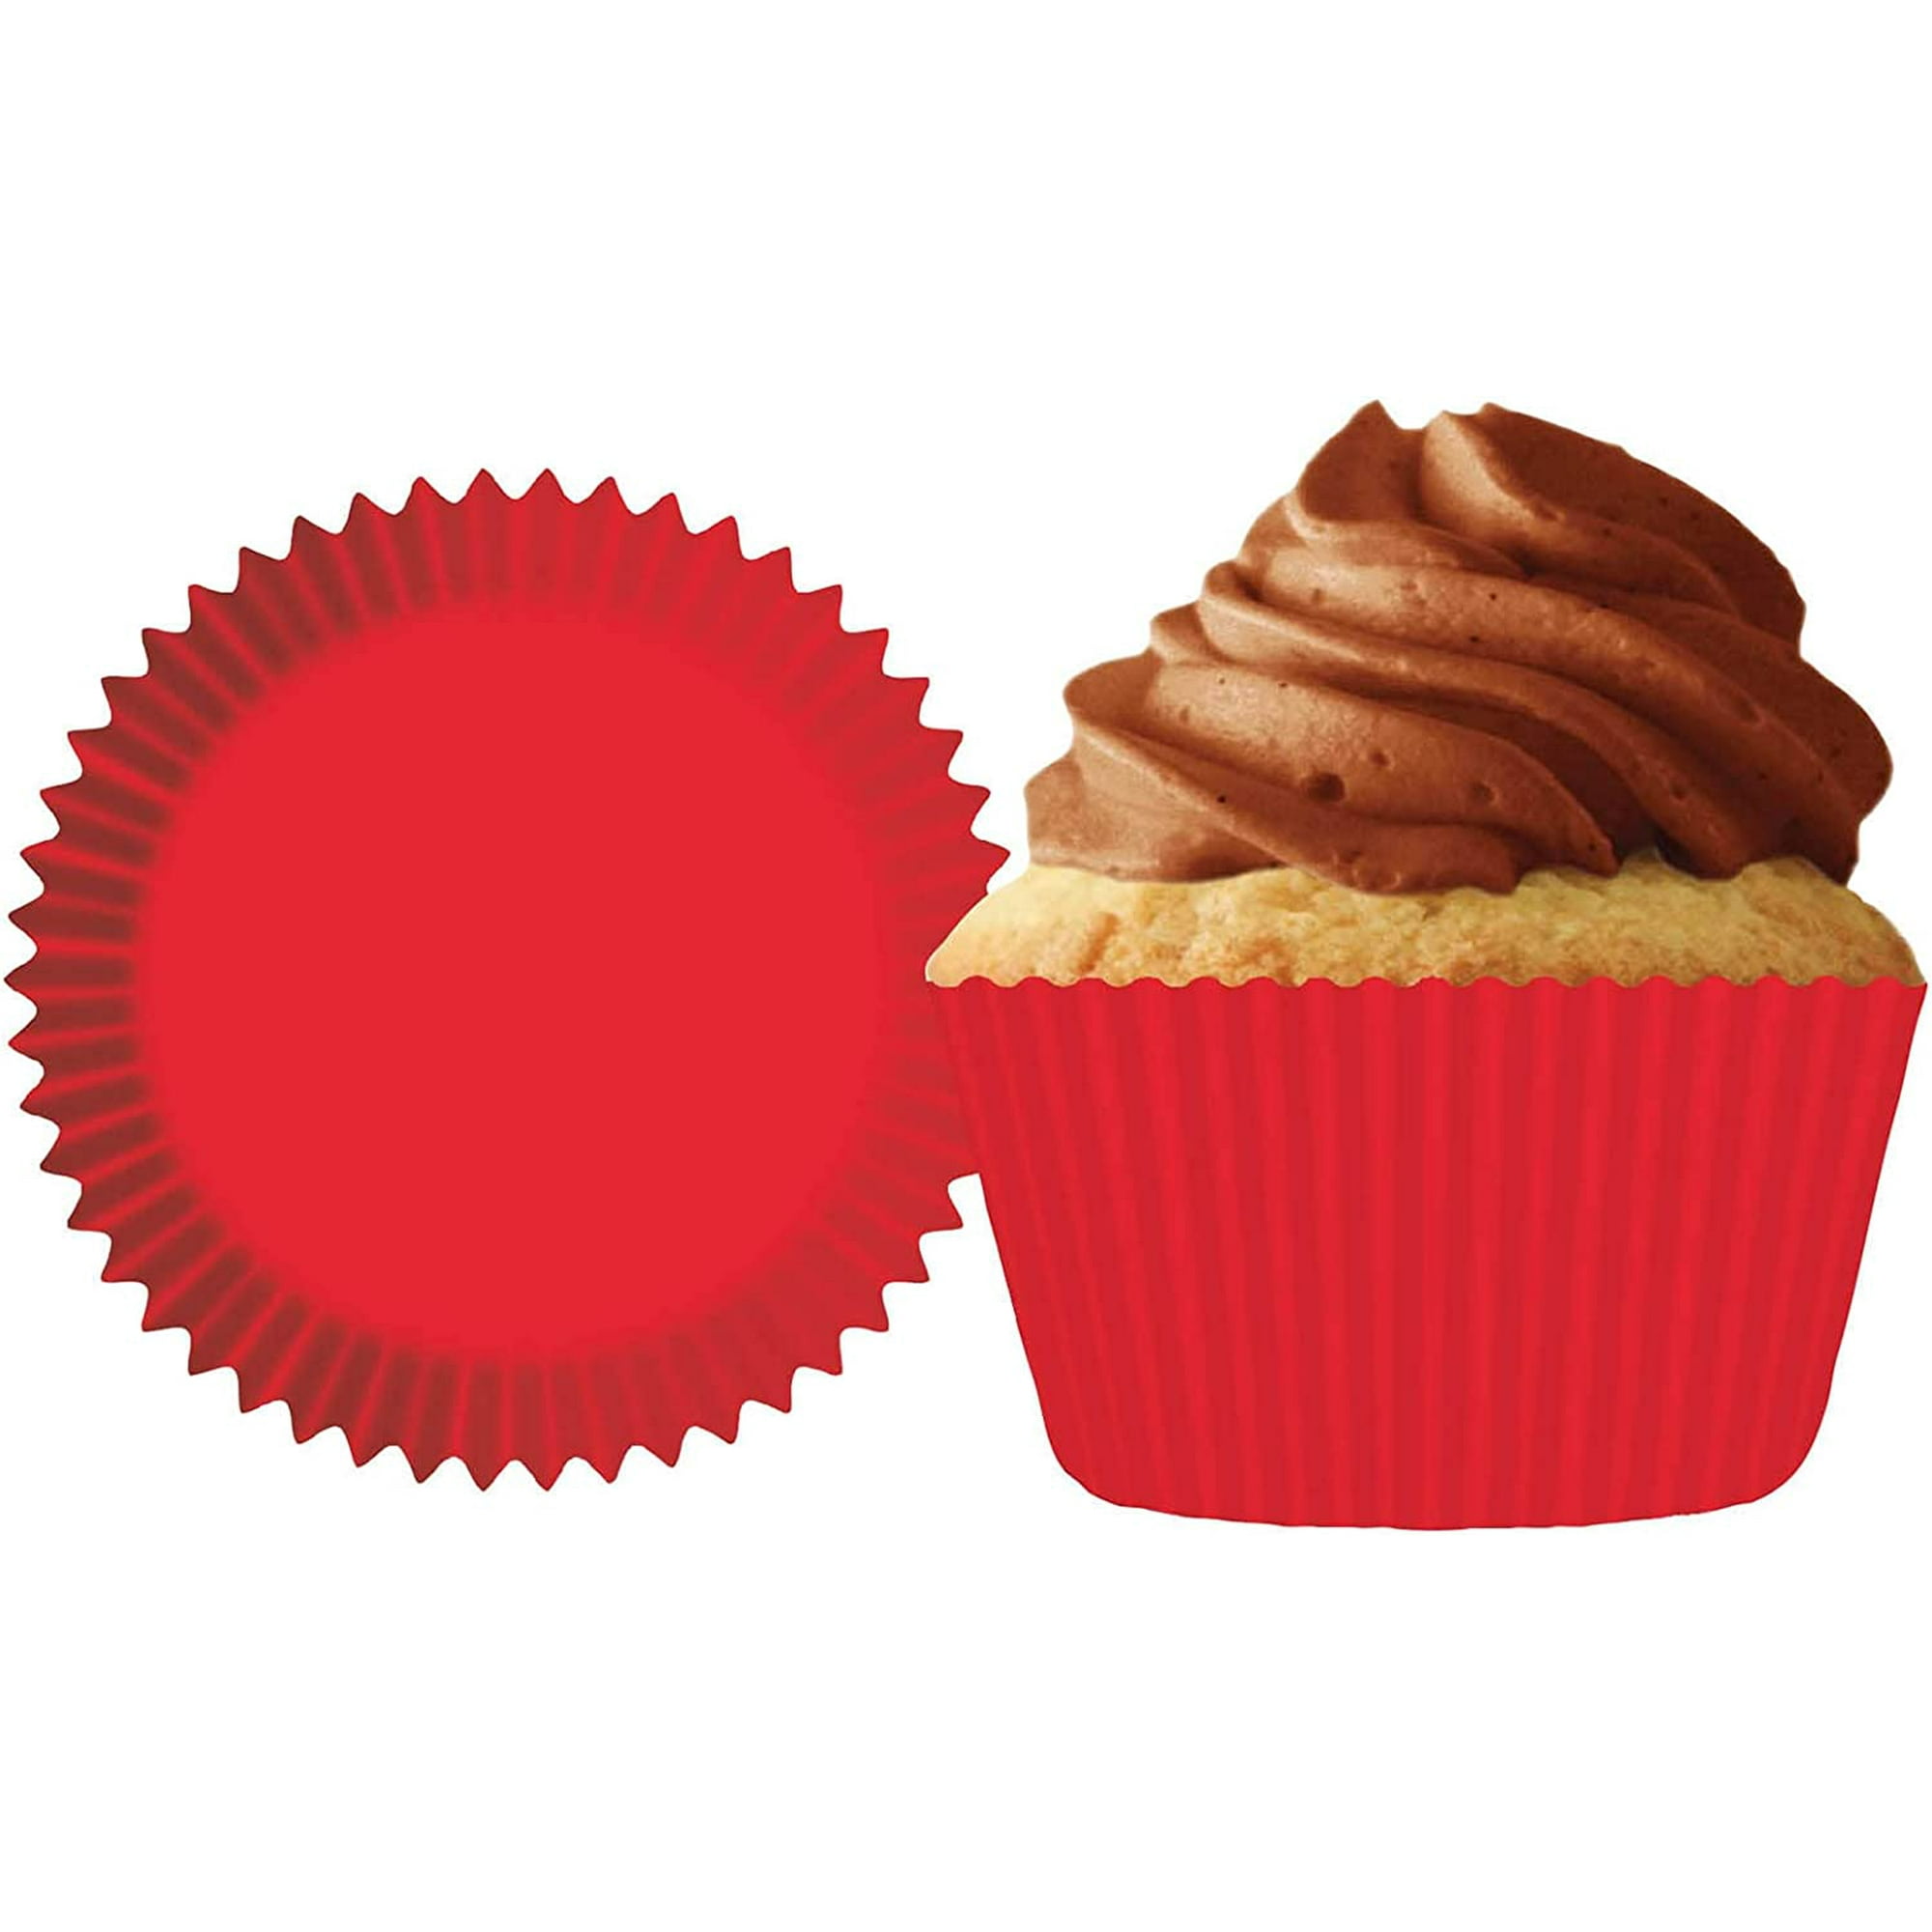 red and blue cupcake clipart